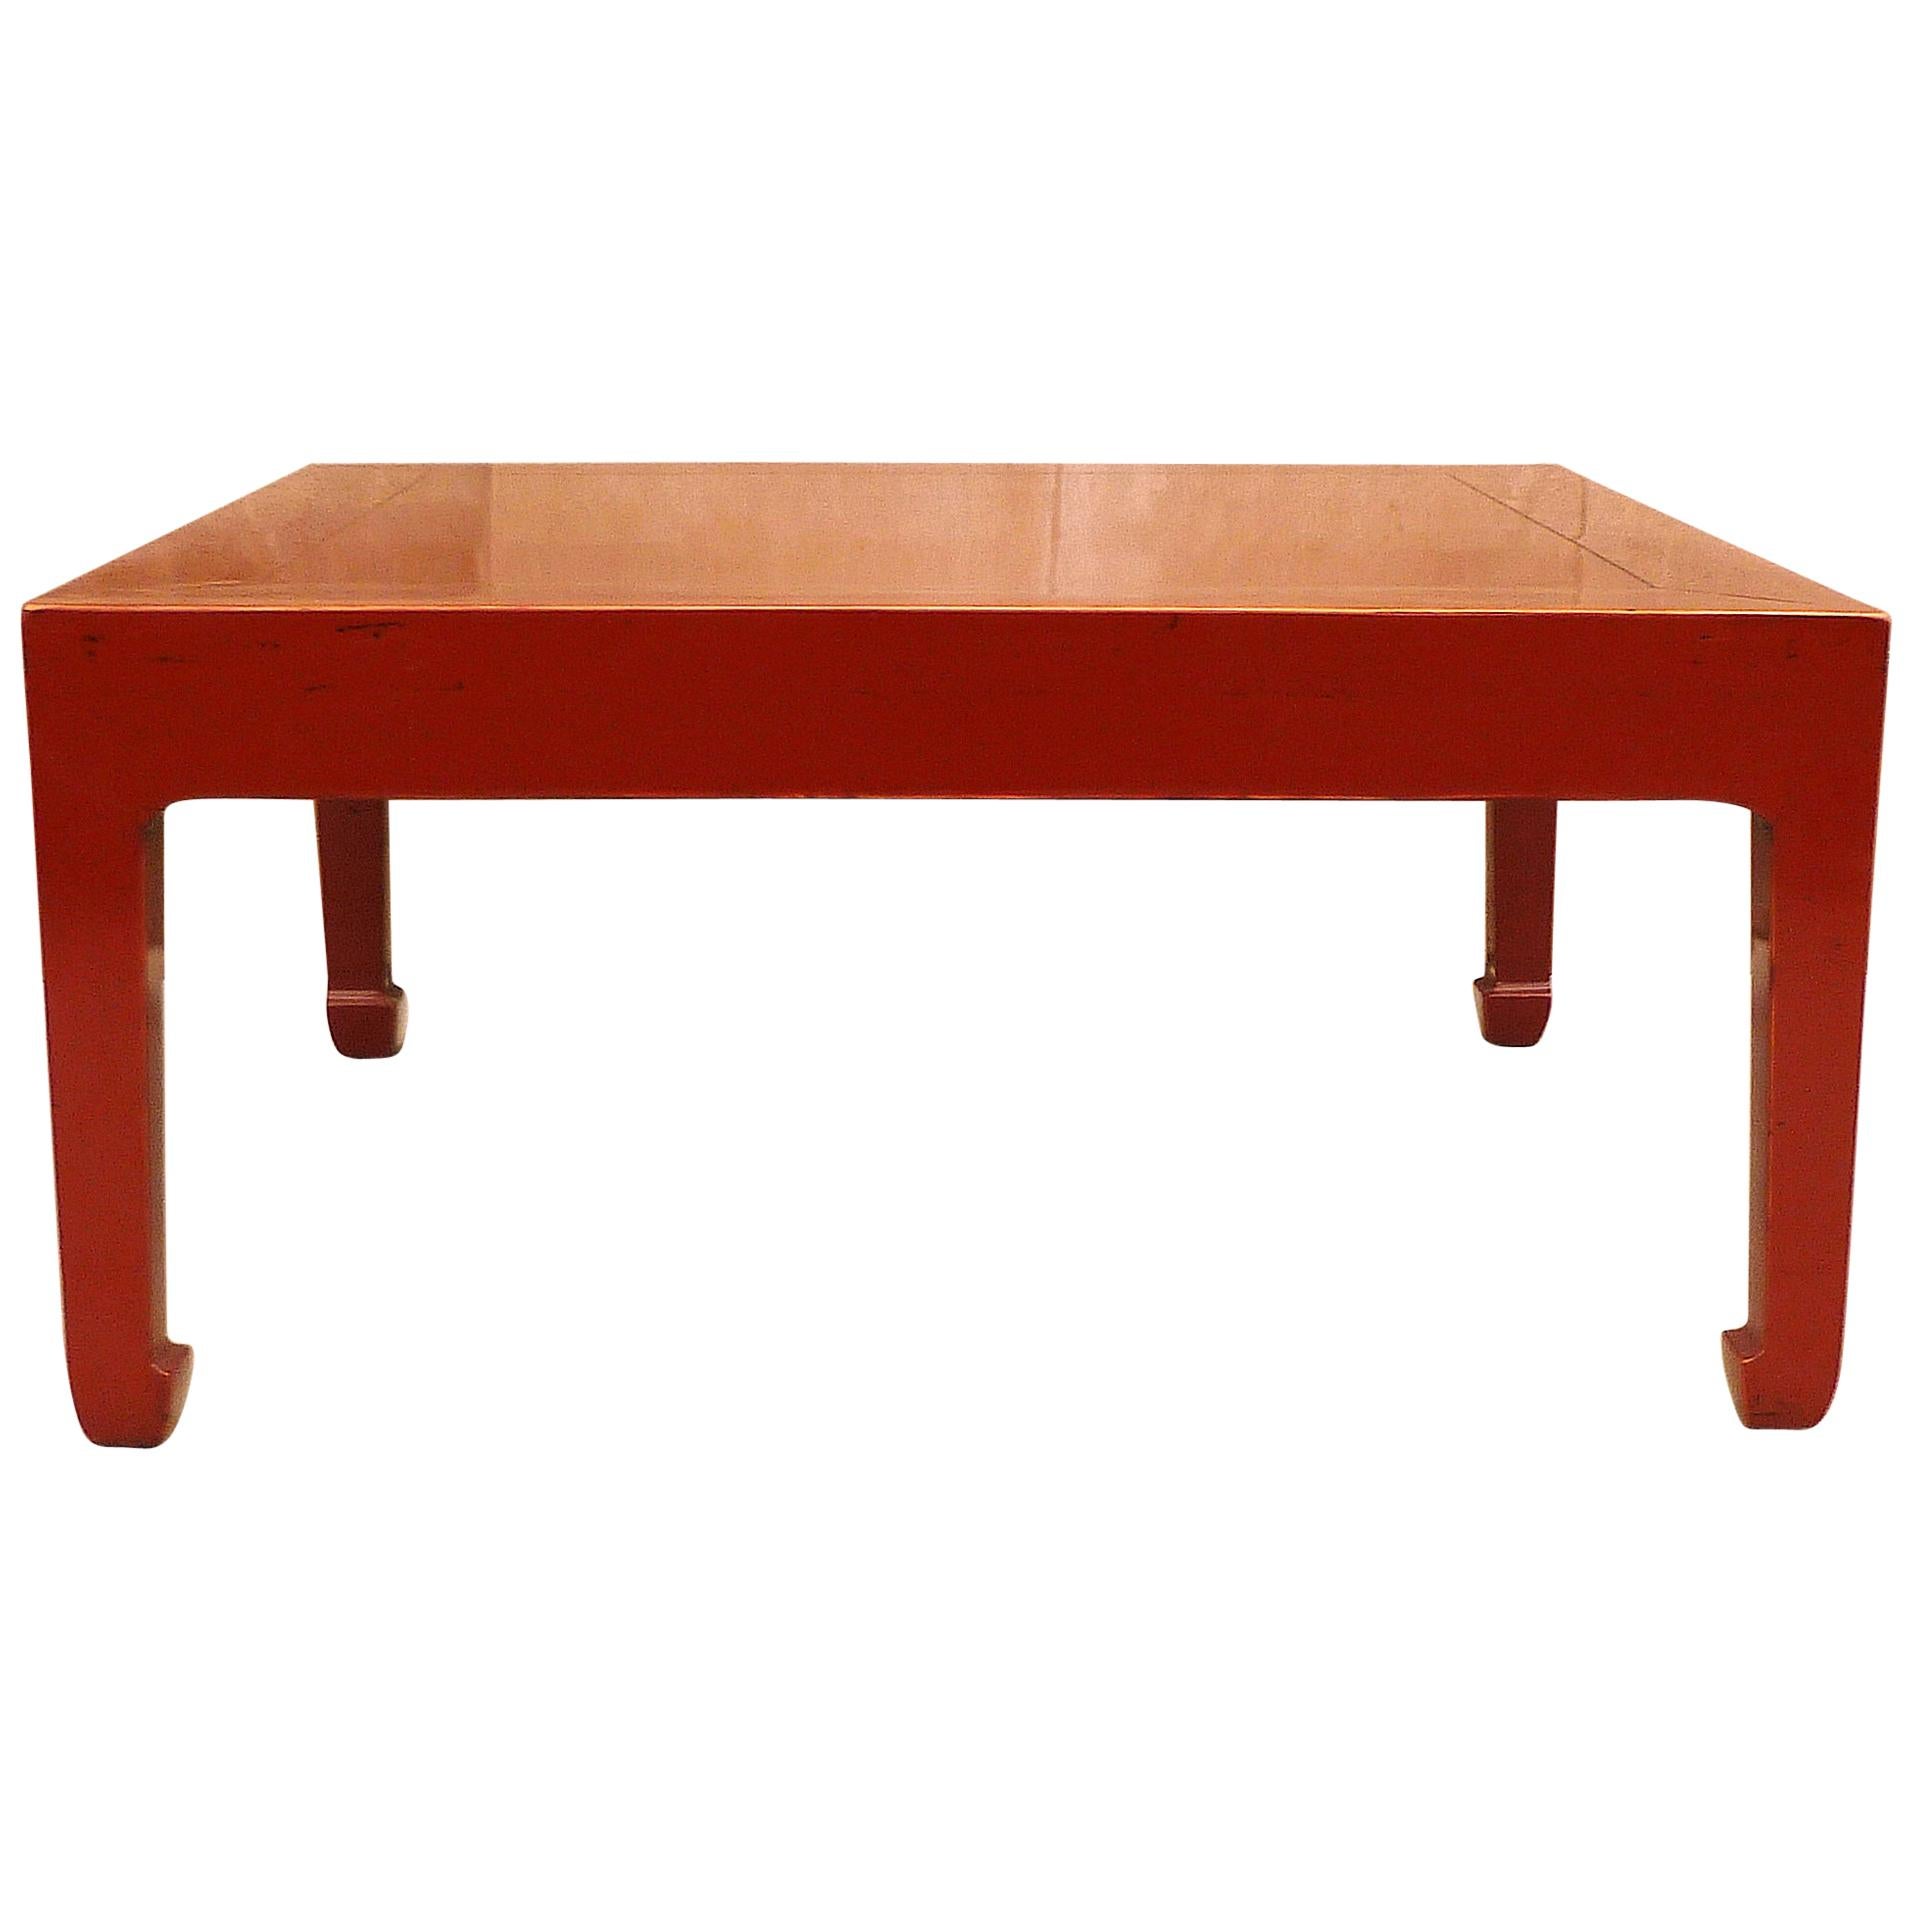 Fine Square Red Lacquer Low Table For Sale